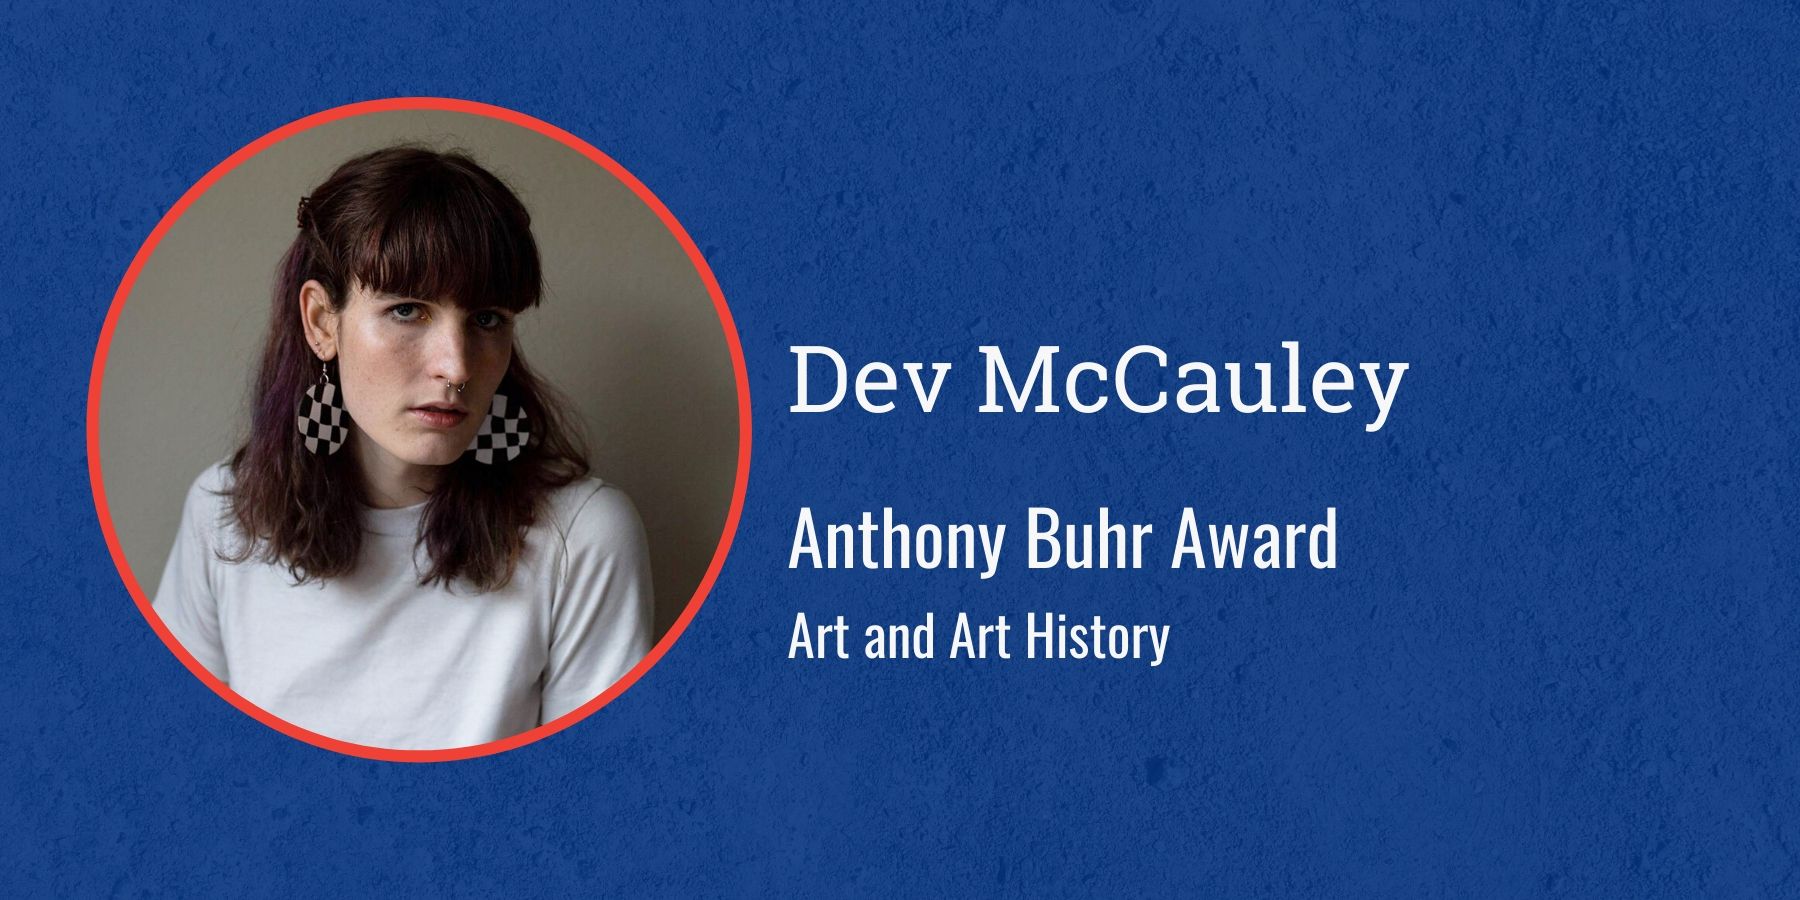 Photo of Dev McCauley with text Anthony Buhr Award, Art and Art History